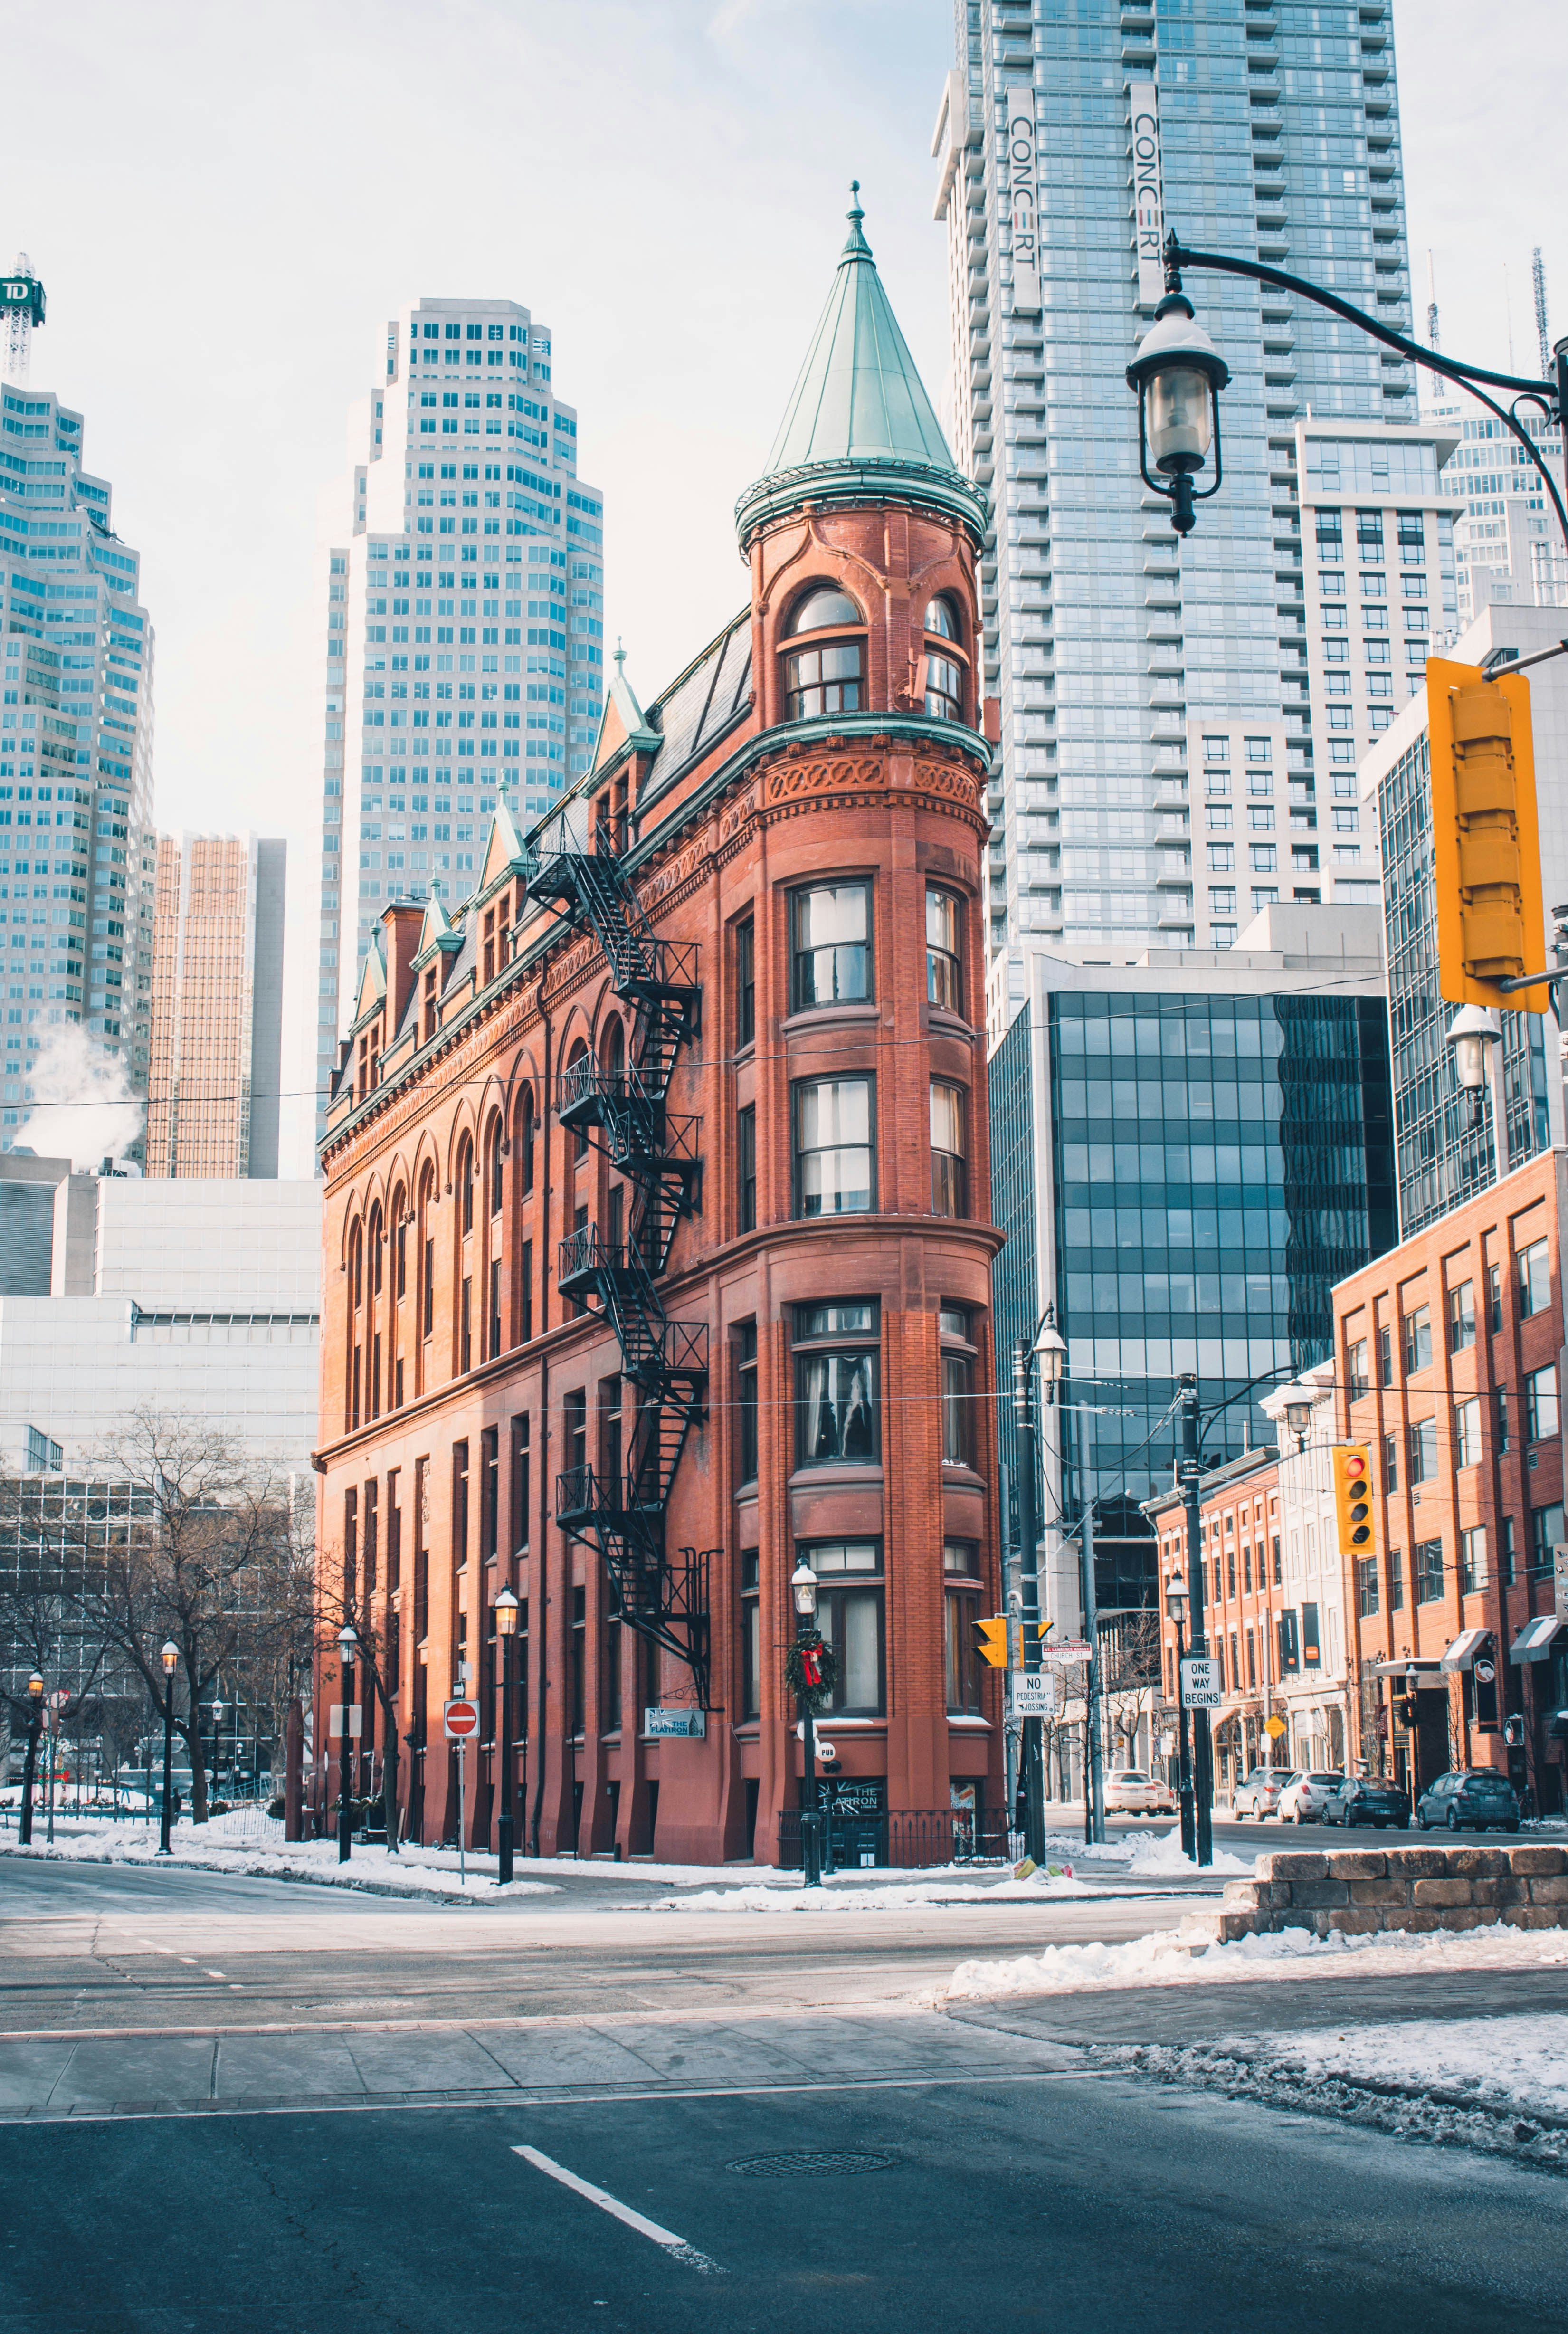 Historical Landmark in Toronto, the Flatiron building stands and is seen by many each day. This weekend, I found my way into the Greater Toronto Area to capture this photo.